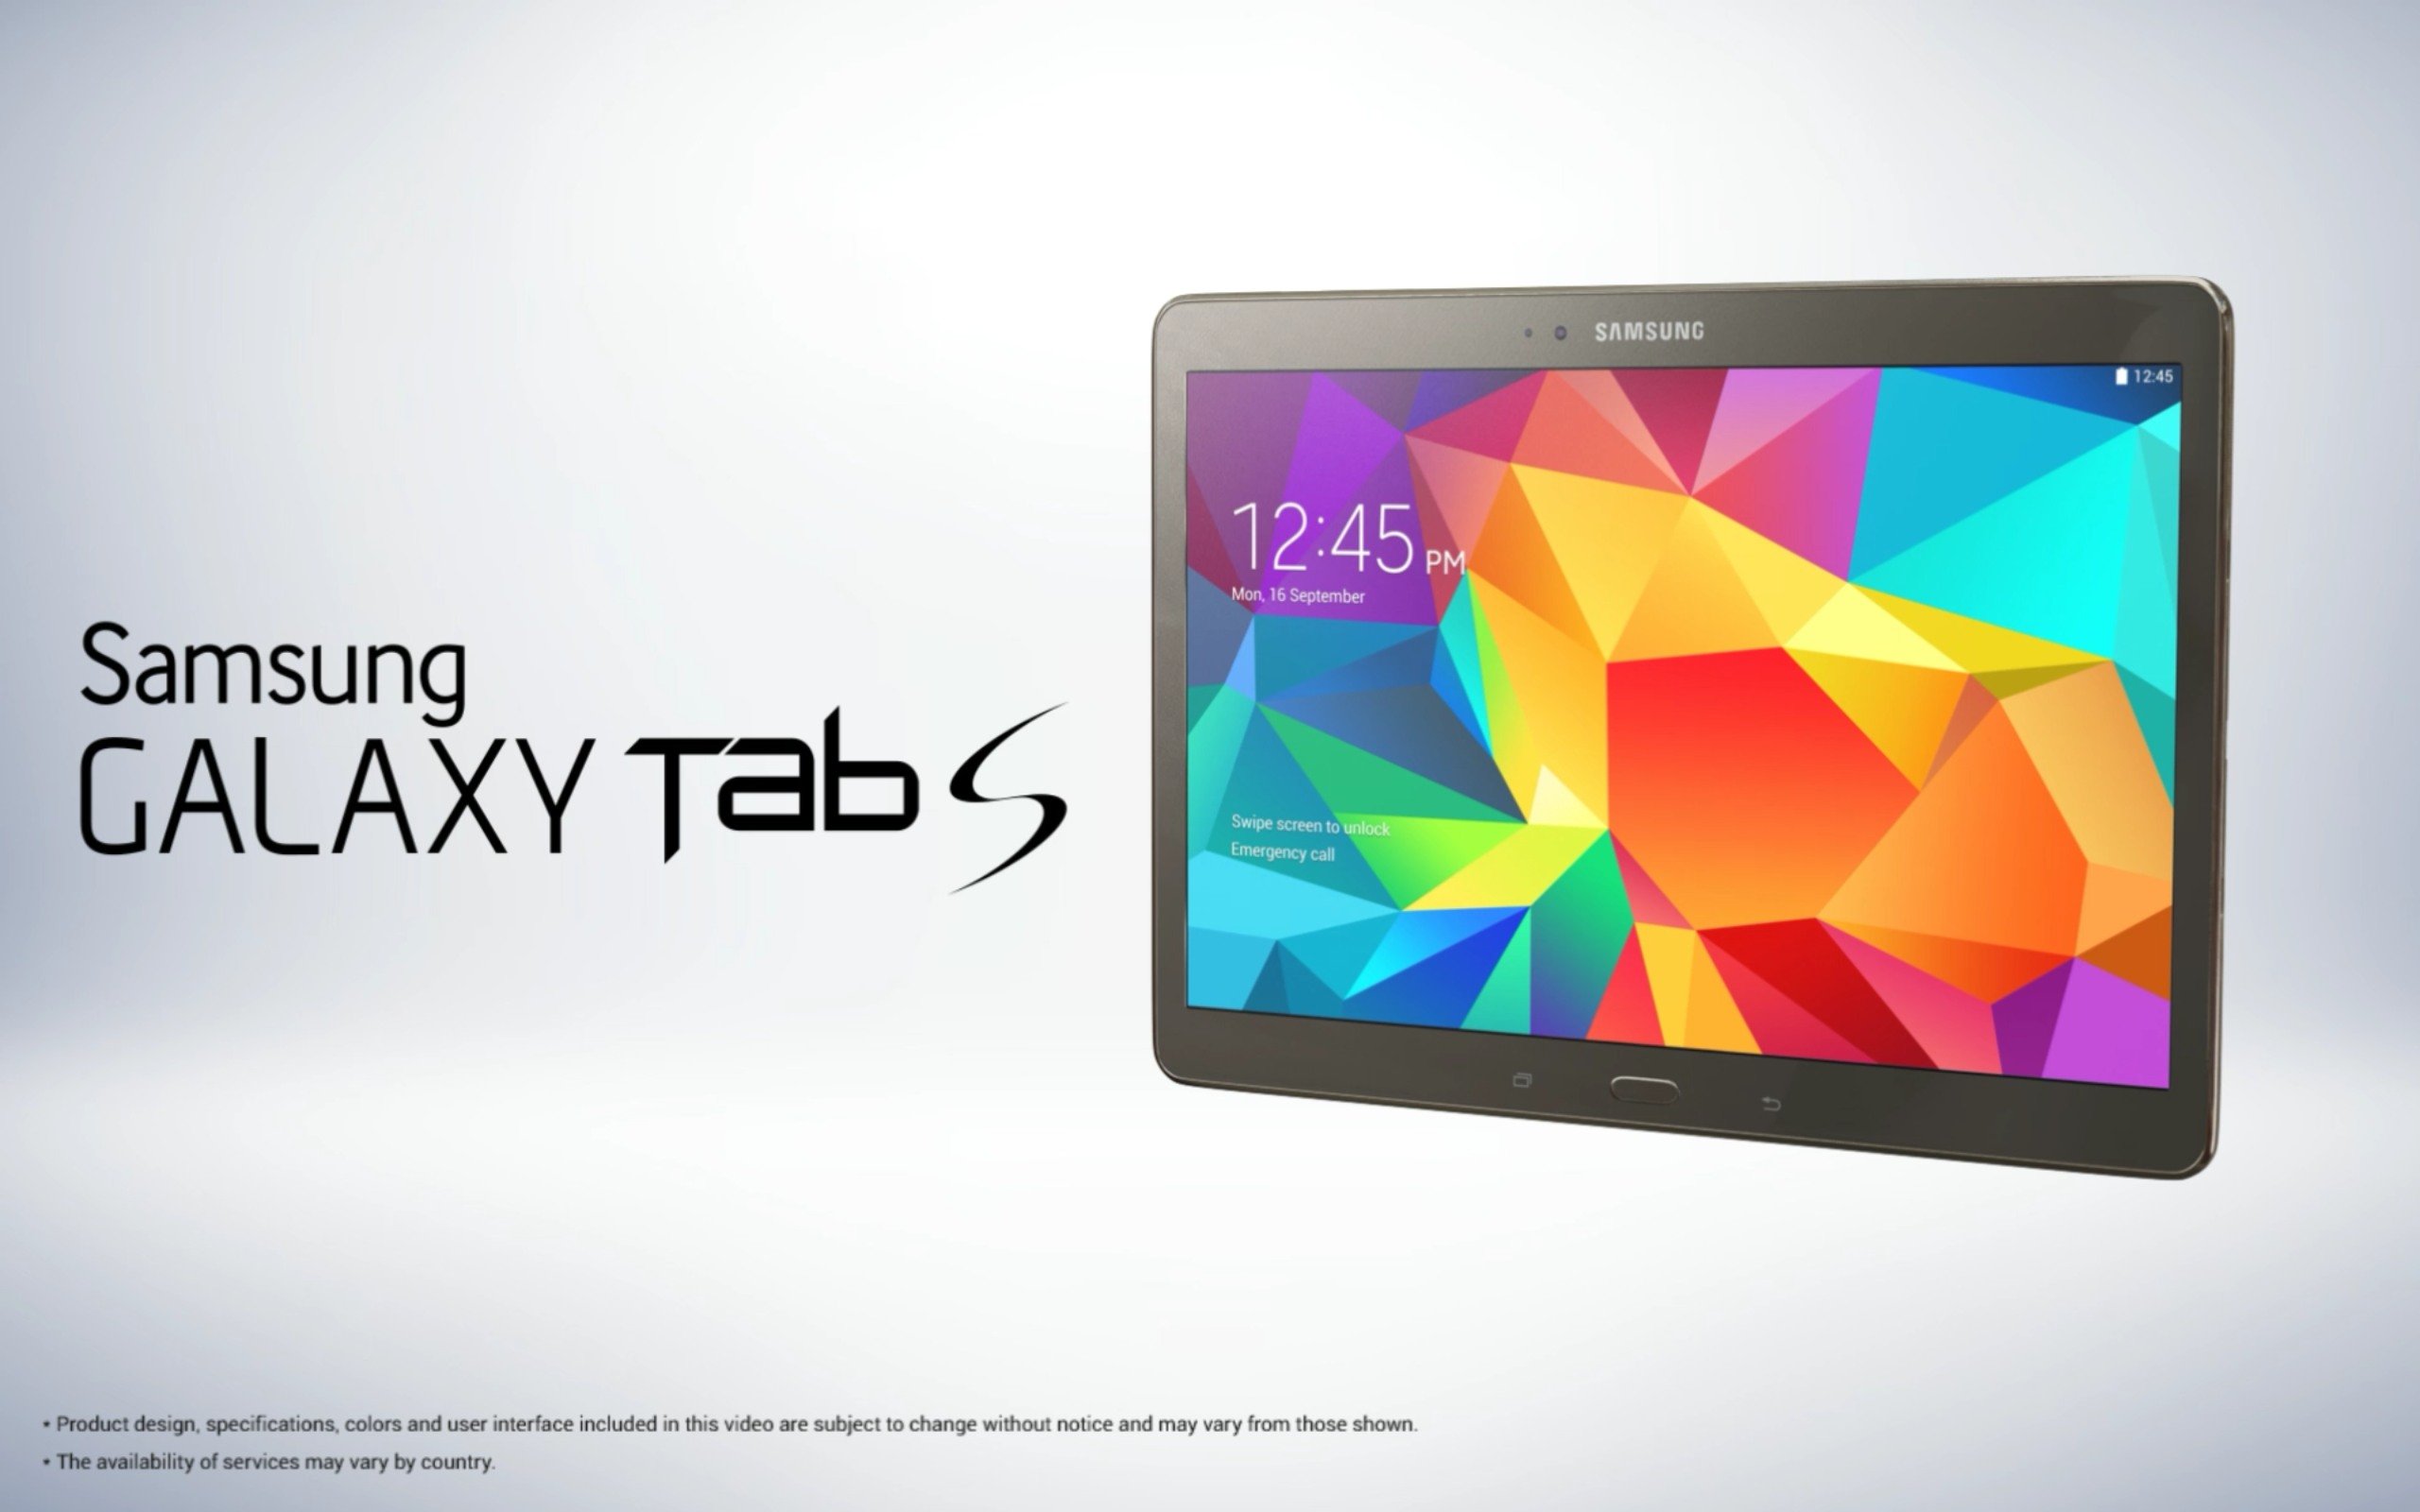 Here are a few Samsung Galaxy Tab S images and features